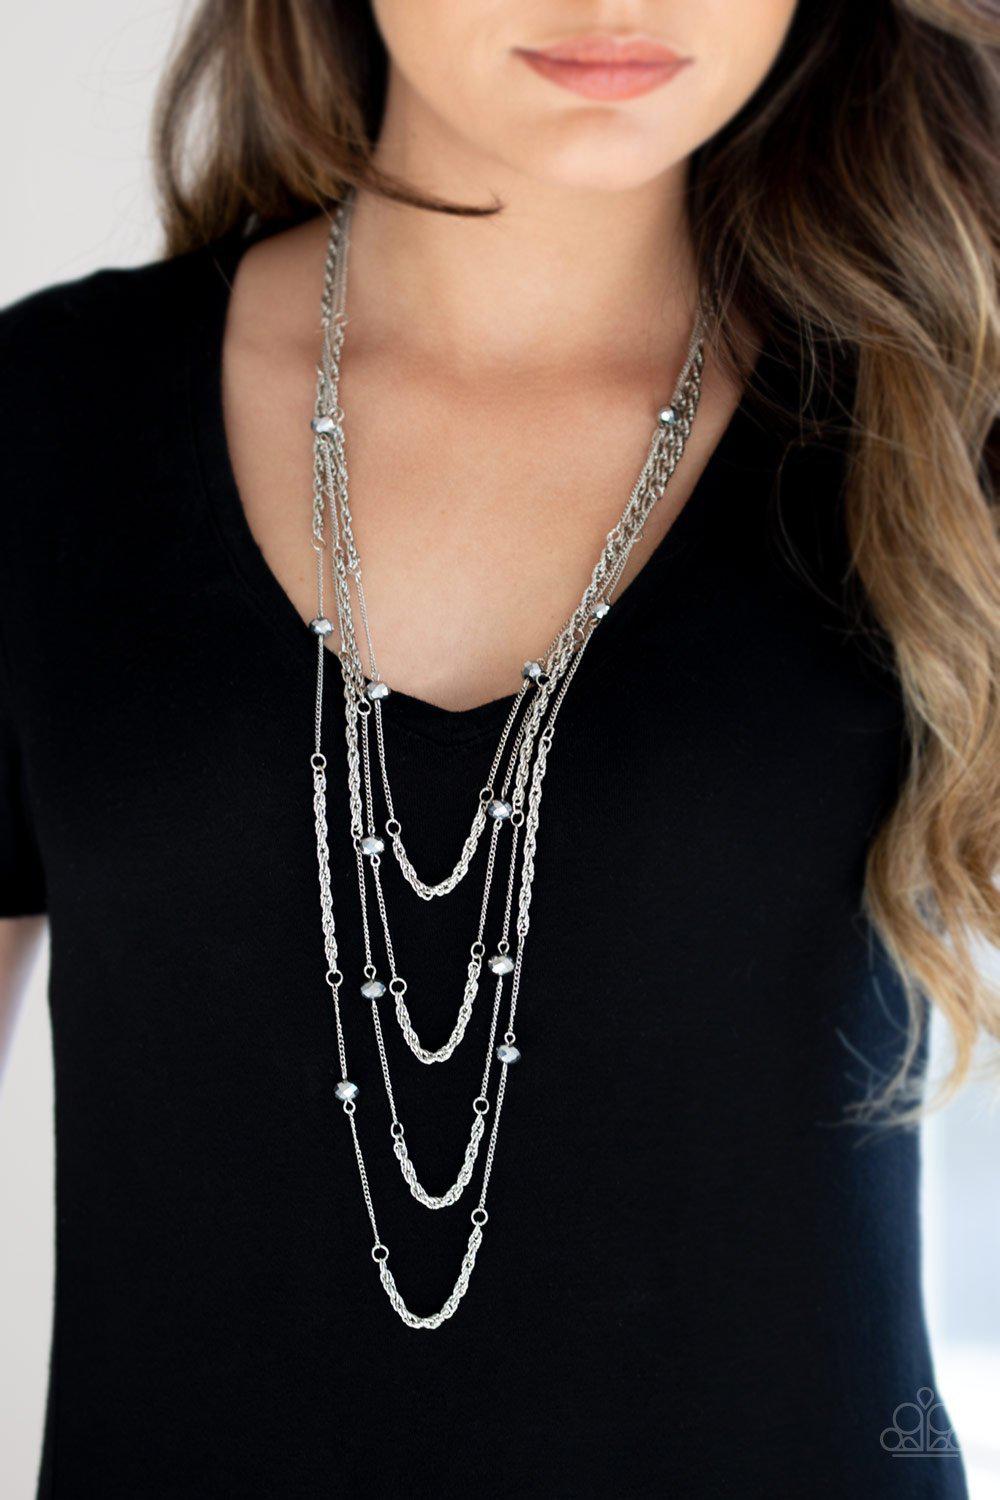 Open For Opulence Silver Necklace and matching Earrings - Paparazzi Accessories-CarasShop.com - $5 Jewelry by Cara Jewels